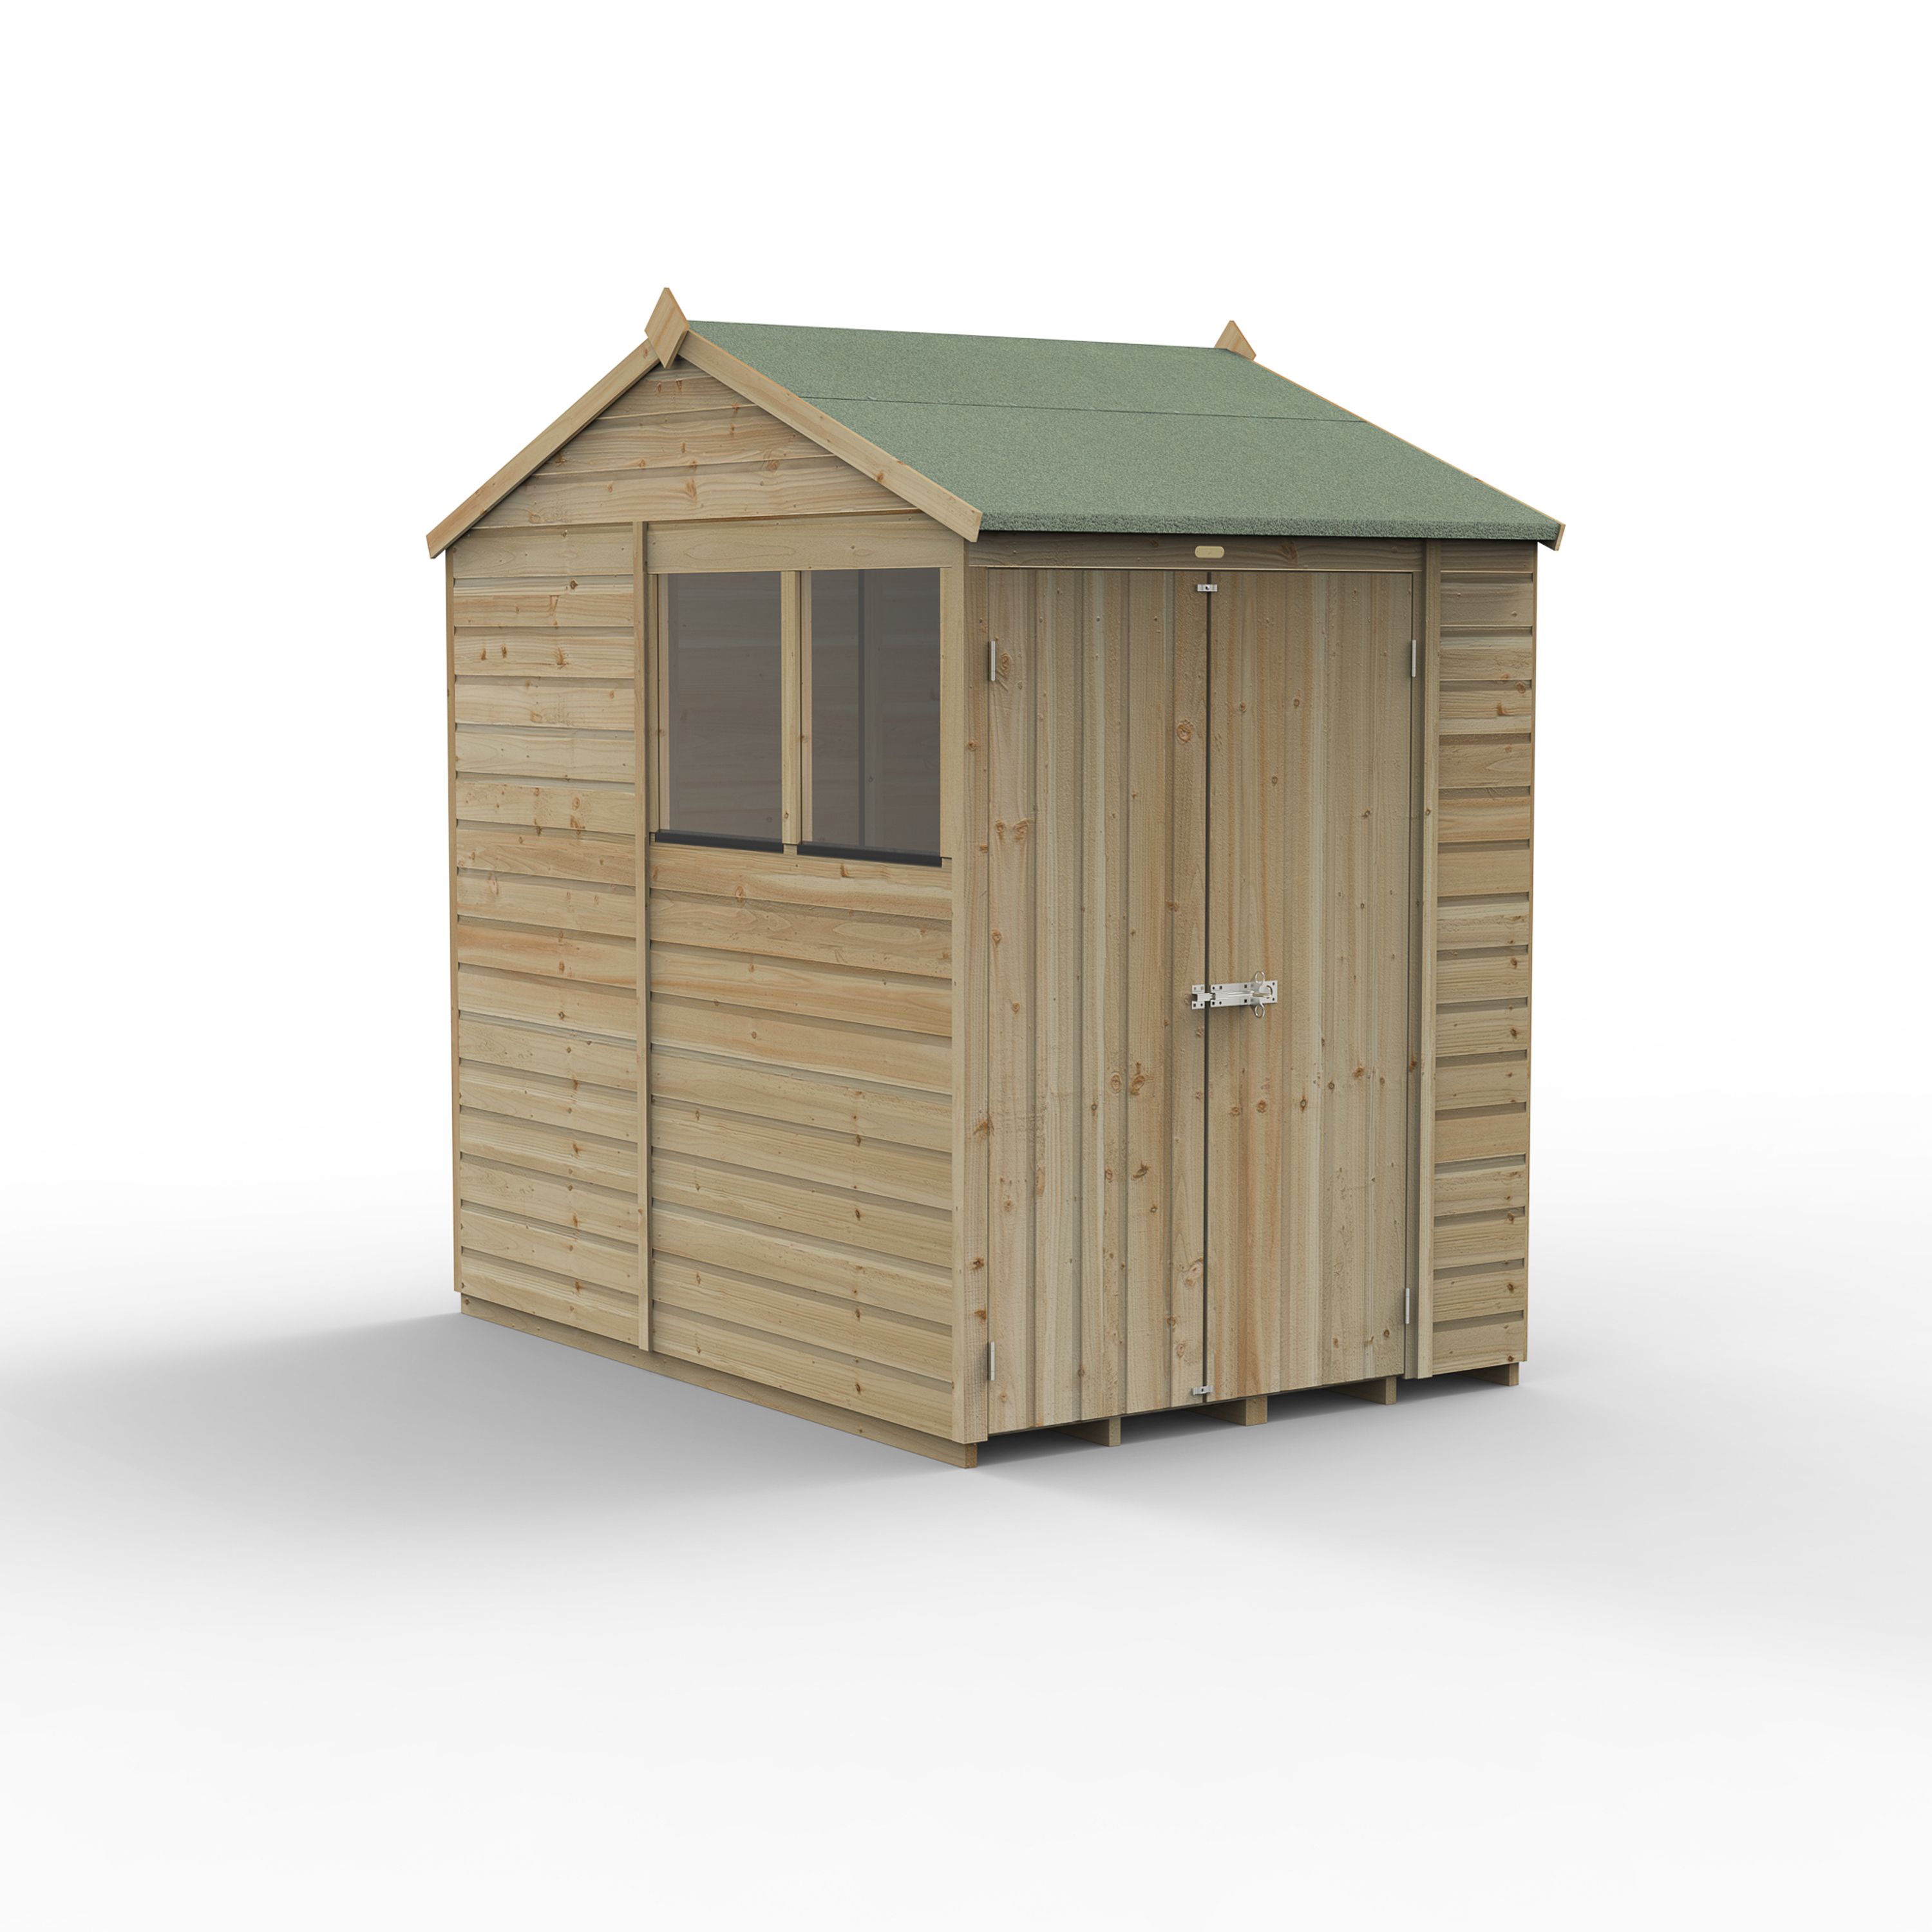 Forest Garden Beckwood 7x5 ft Reverse apex Natural timber Wooden 2 door Shed with floor & 2 windows - Assembly not required